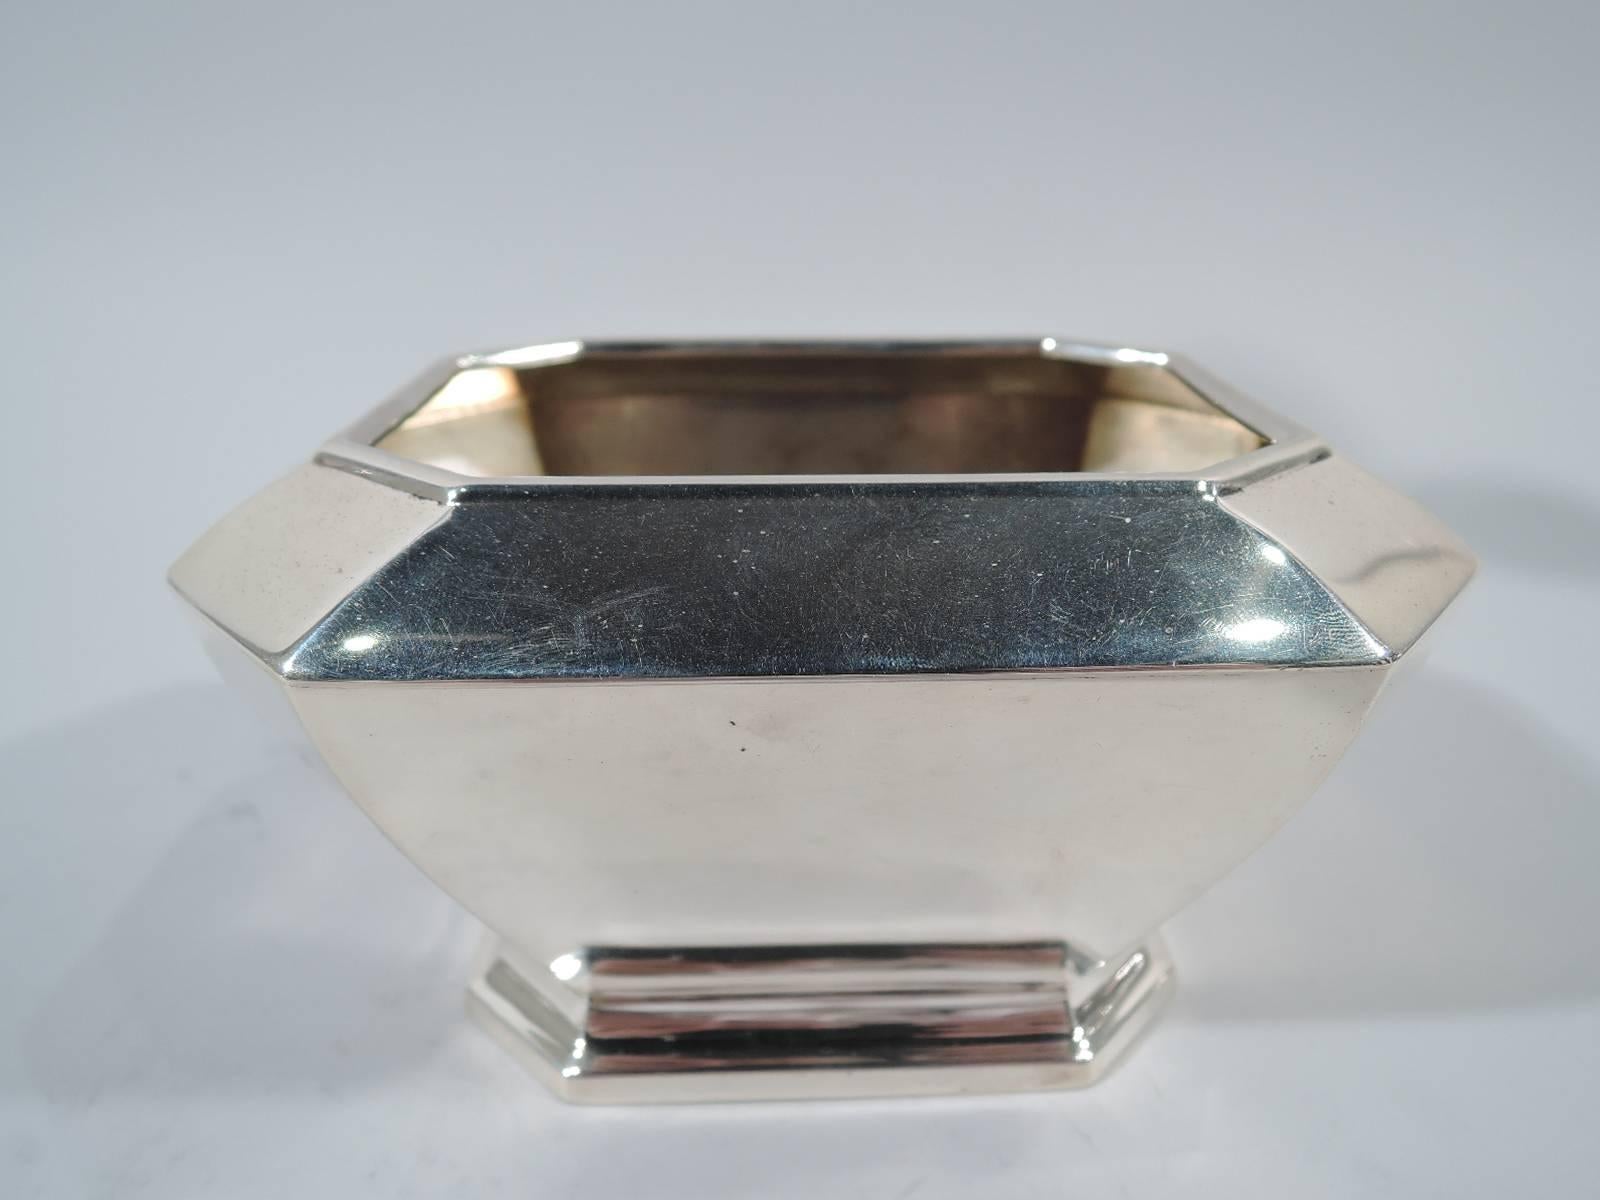 Art Deco sterling silver bowl in Fairfax pattern. Made by Durgin (a division of Gorham) in Concord, New Hampshire. Four tapering sides with chamfered corners. Inset mouth and raised foot same. Hallmark includes no. 04. Weight: 7.3 troy ounces.